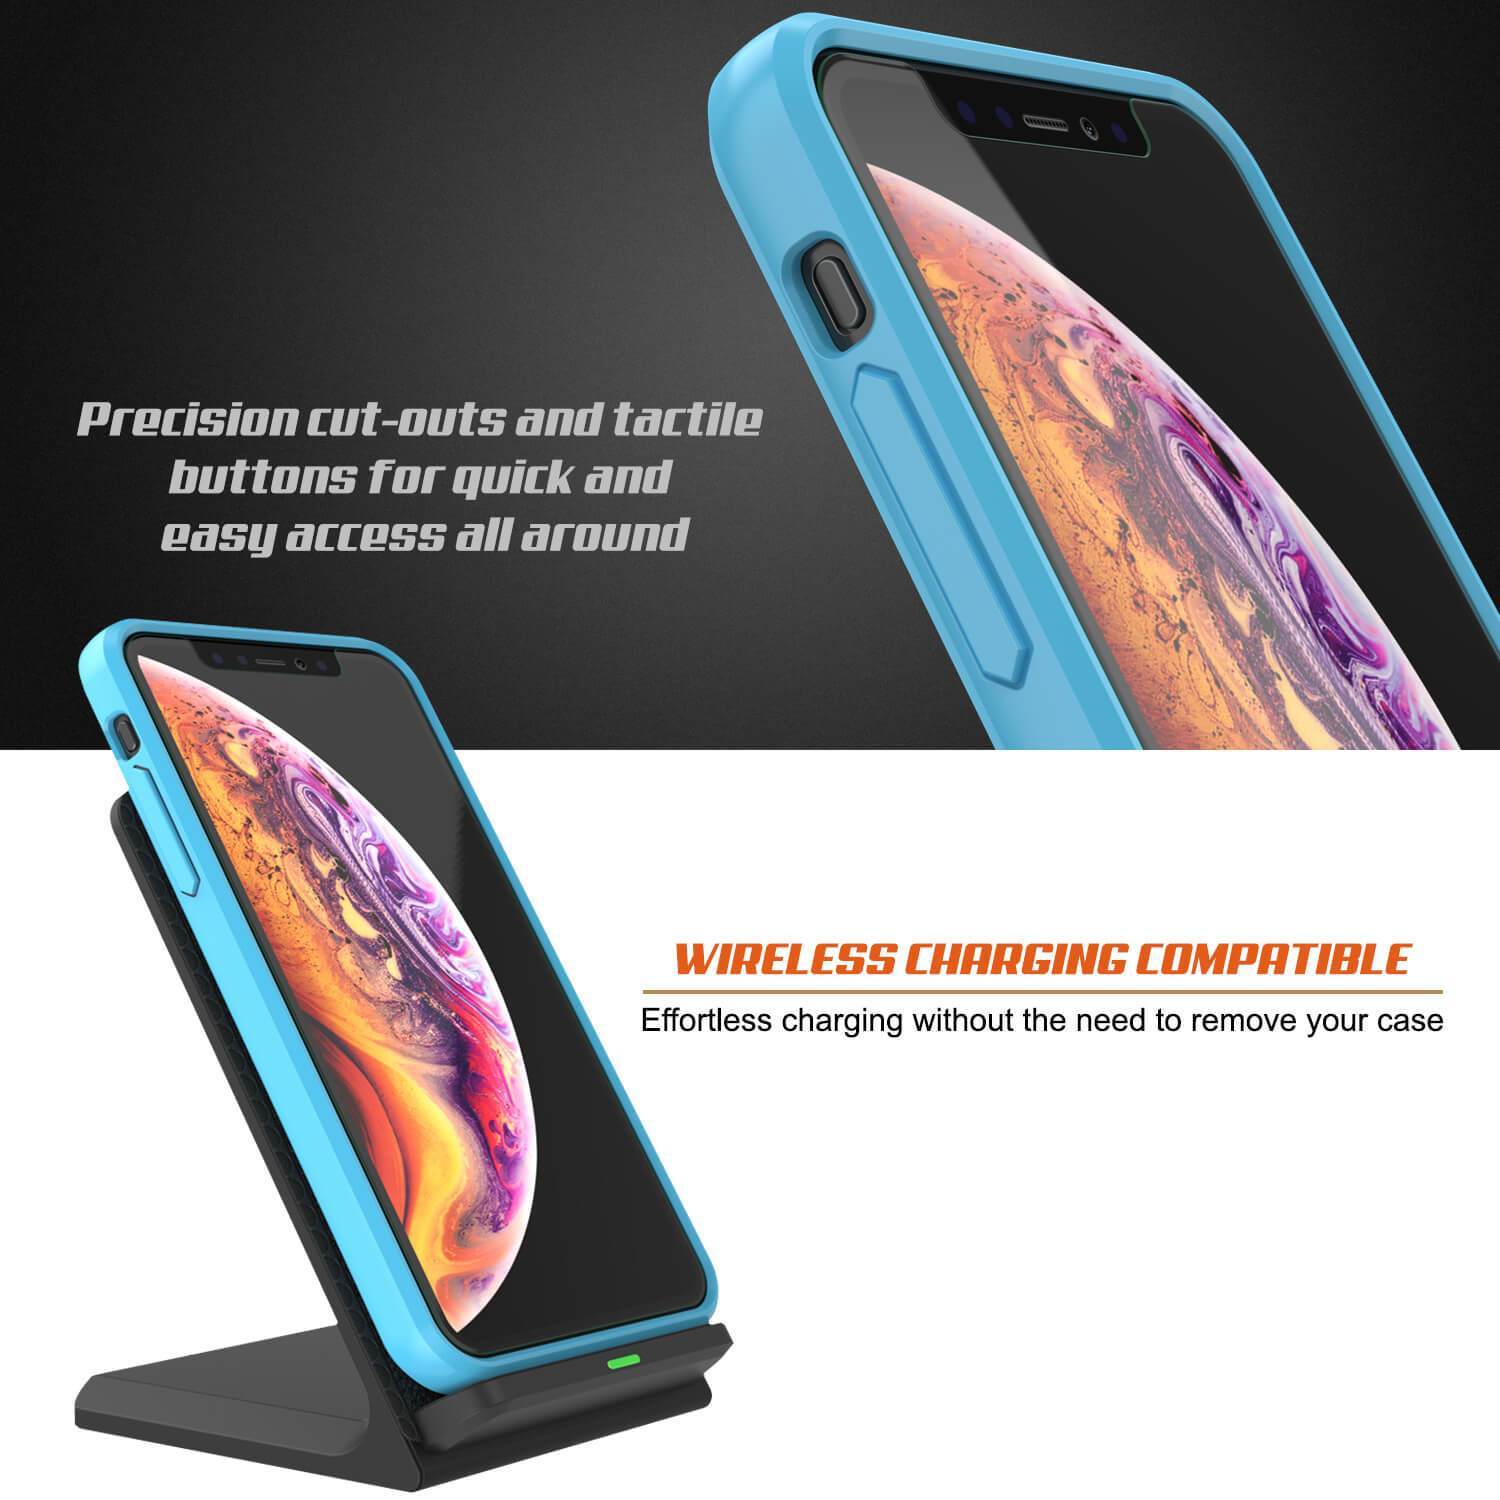 iPhone XS Case, PUNKcase [Lucid 2.0 Series] [Slim Fit] Armor Cover [Light-Blue]